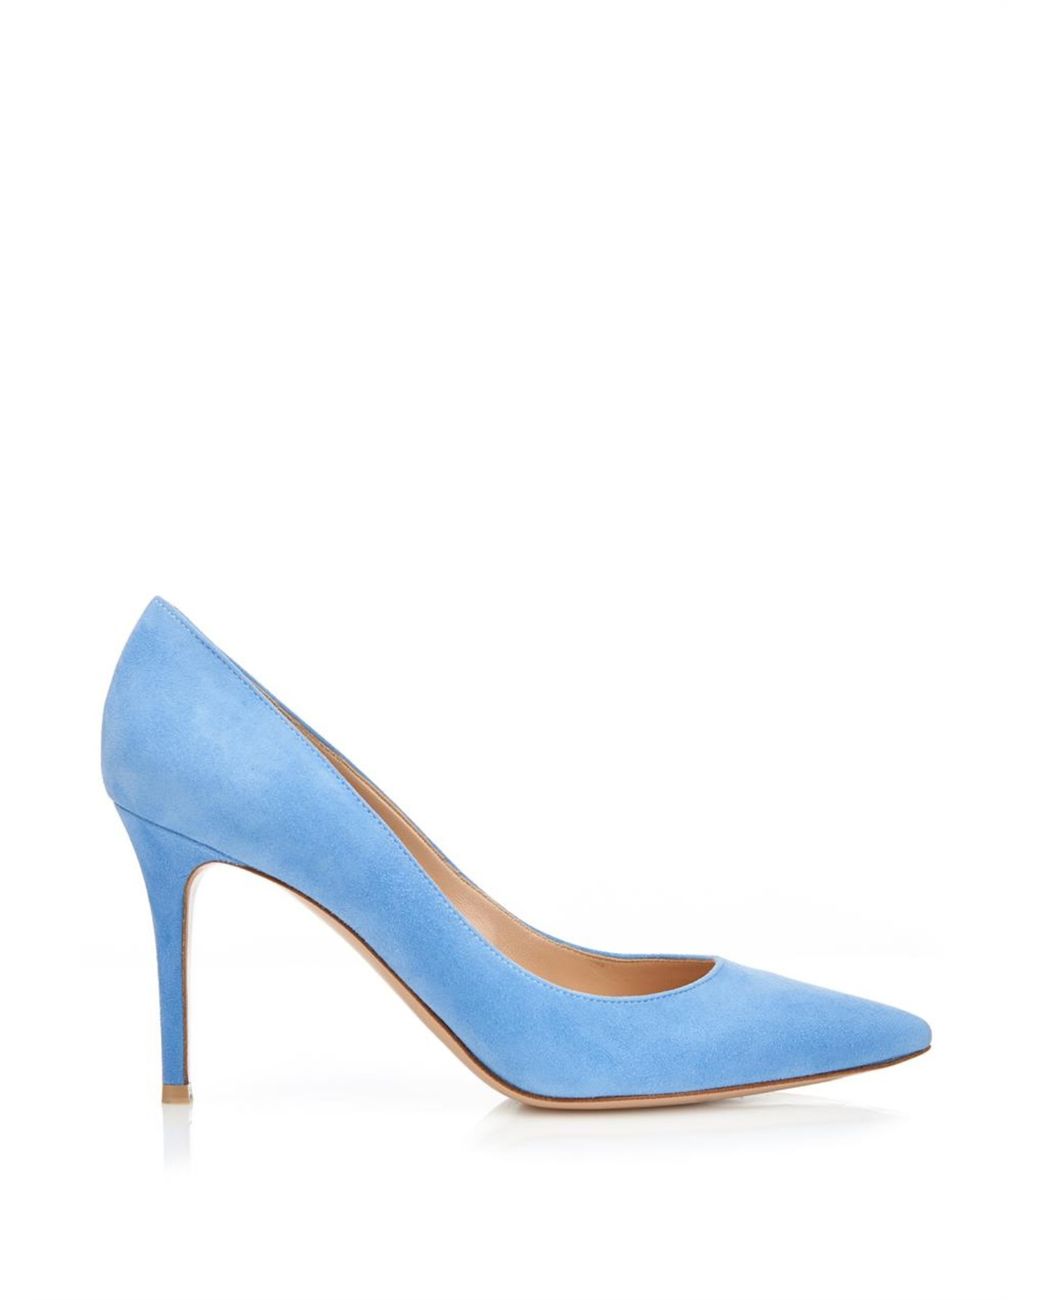 Gianvito Rossi Business Point-Toe Suede Pumps in Blue | Lyst